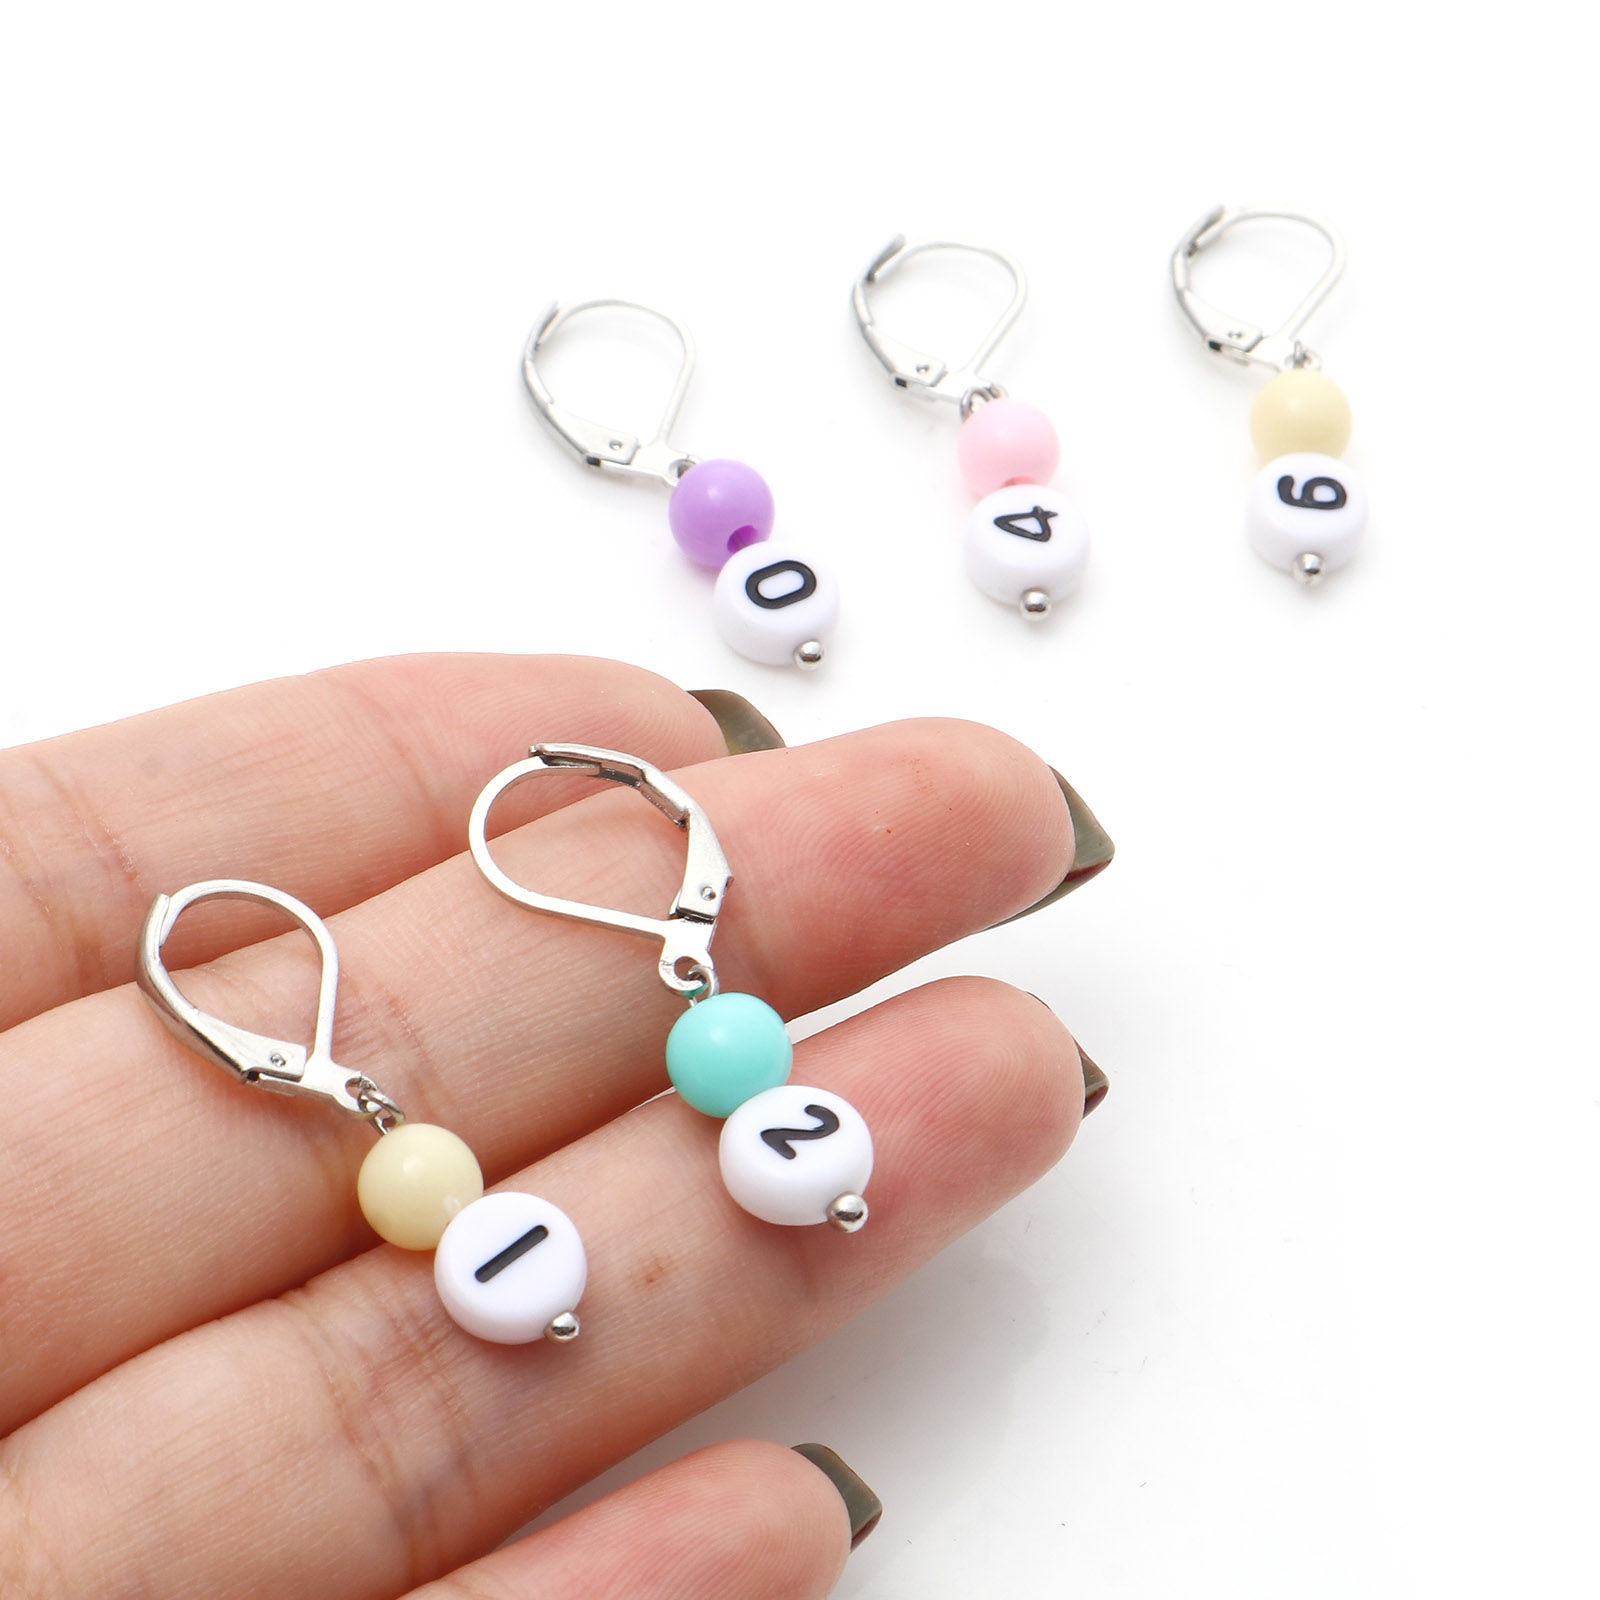 Picture of Copper & Acrylic Knitting Stitch Markers Number 0-9 Silver Tone At Random Color 3.1cm x 1.1cm, 1 Set ( 10 PCs/Set)